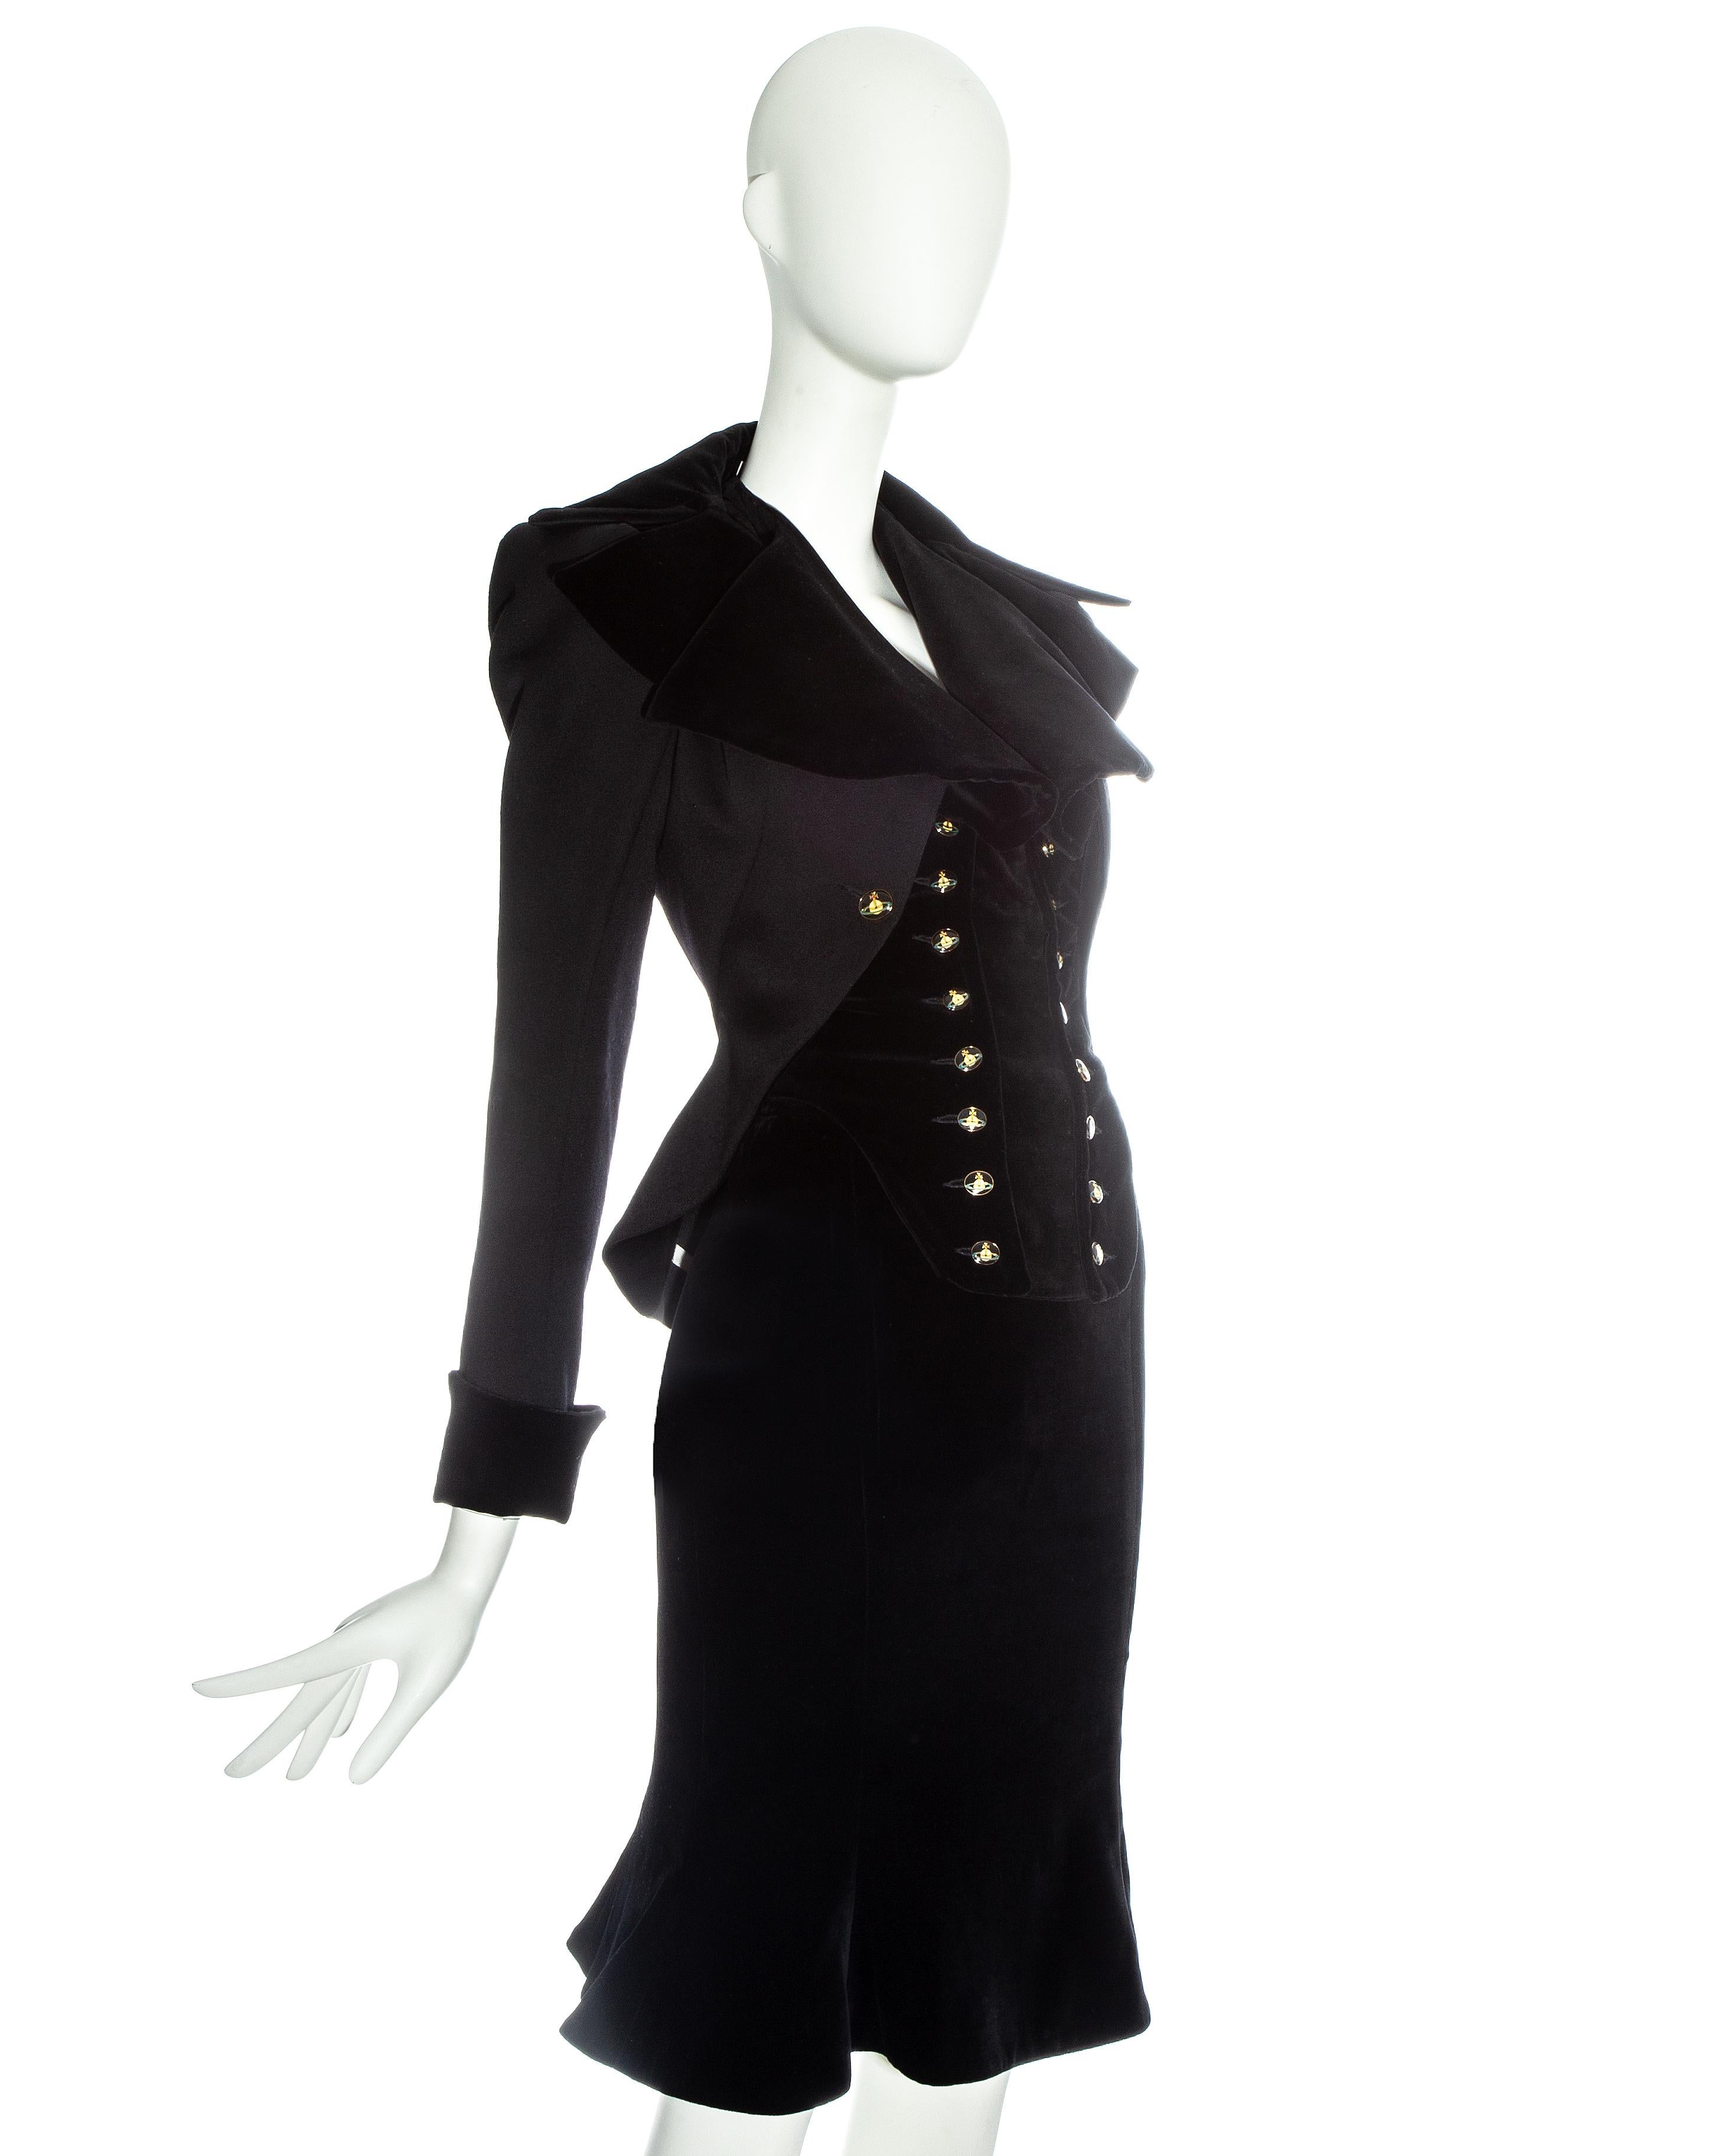 Vivienne Westwood black velvet 'Vive La Cocotte' corseted skirt suit. Riding jacket with detachable corseted waist coat, signature orb button fastenings and puff sleeves. Sold with matching velvet above the knee flounce skirt  

Fall-Winter 1995